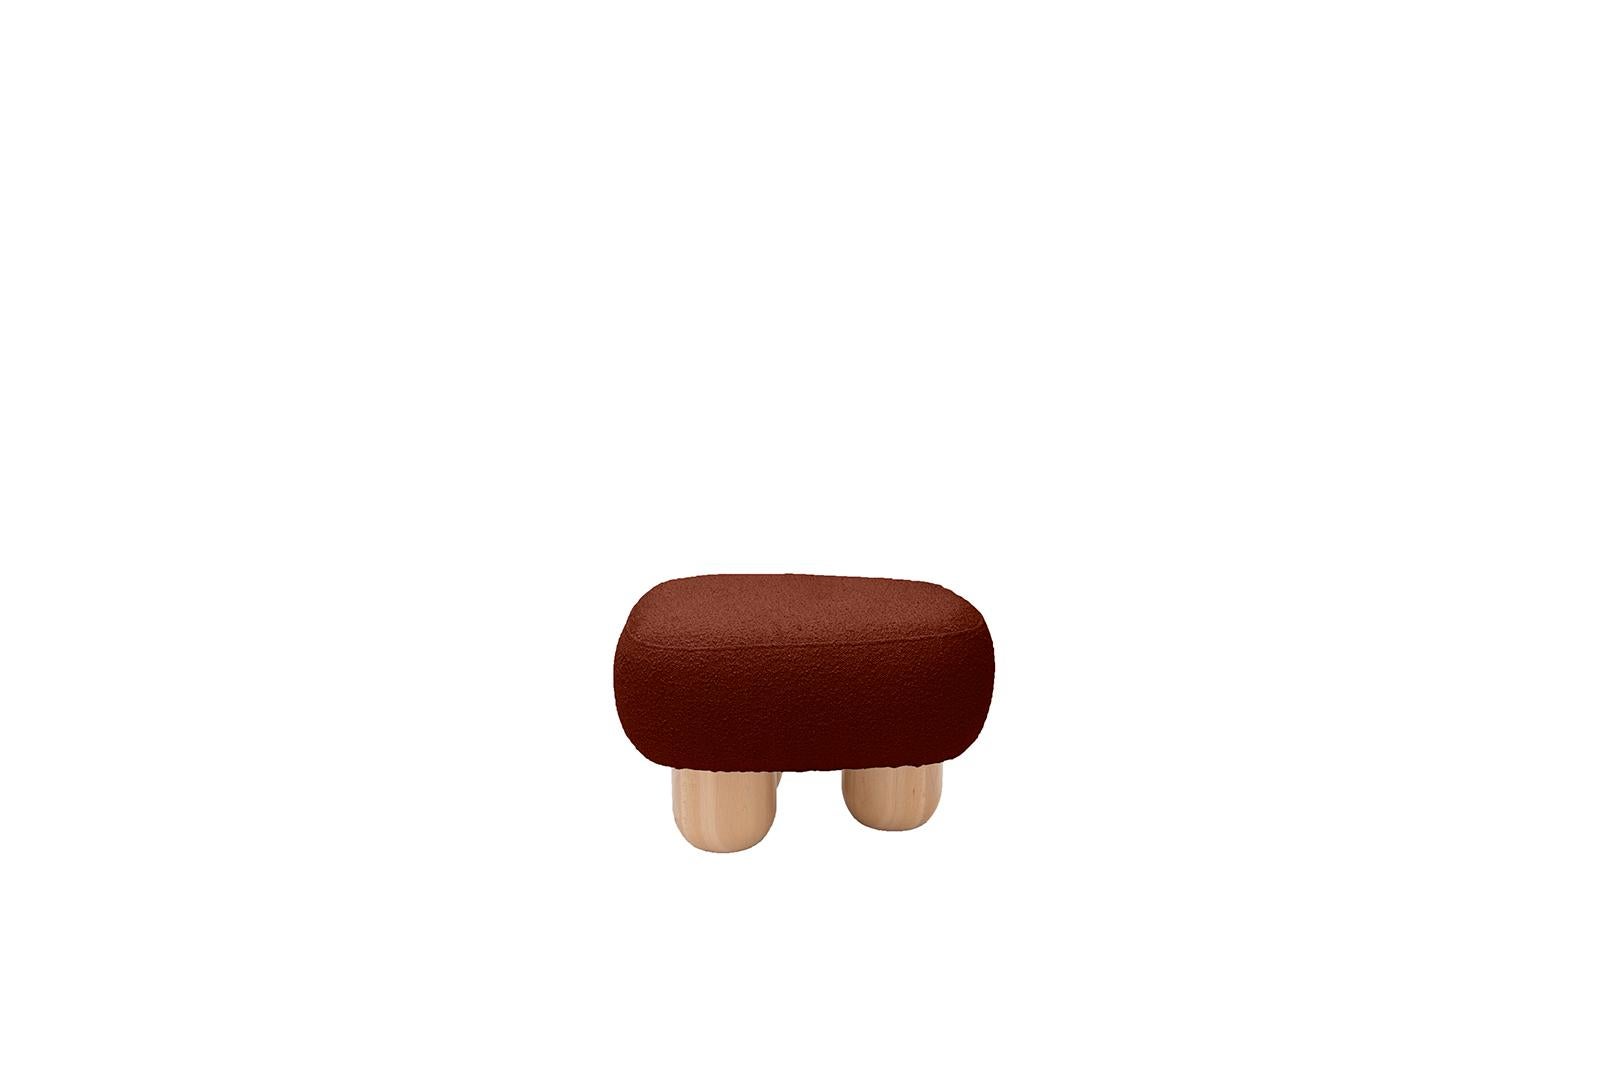 Object 049 Brick Pouf by NG Design
Dimensions: D64 x W51 x H41 cm
Materials: Boucle upholstery, Solid Oak

Also Available: All of objects available in different materials and colors on demand.

Will you use the object049 pouf as an additional